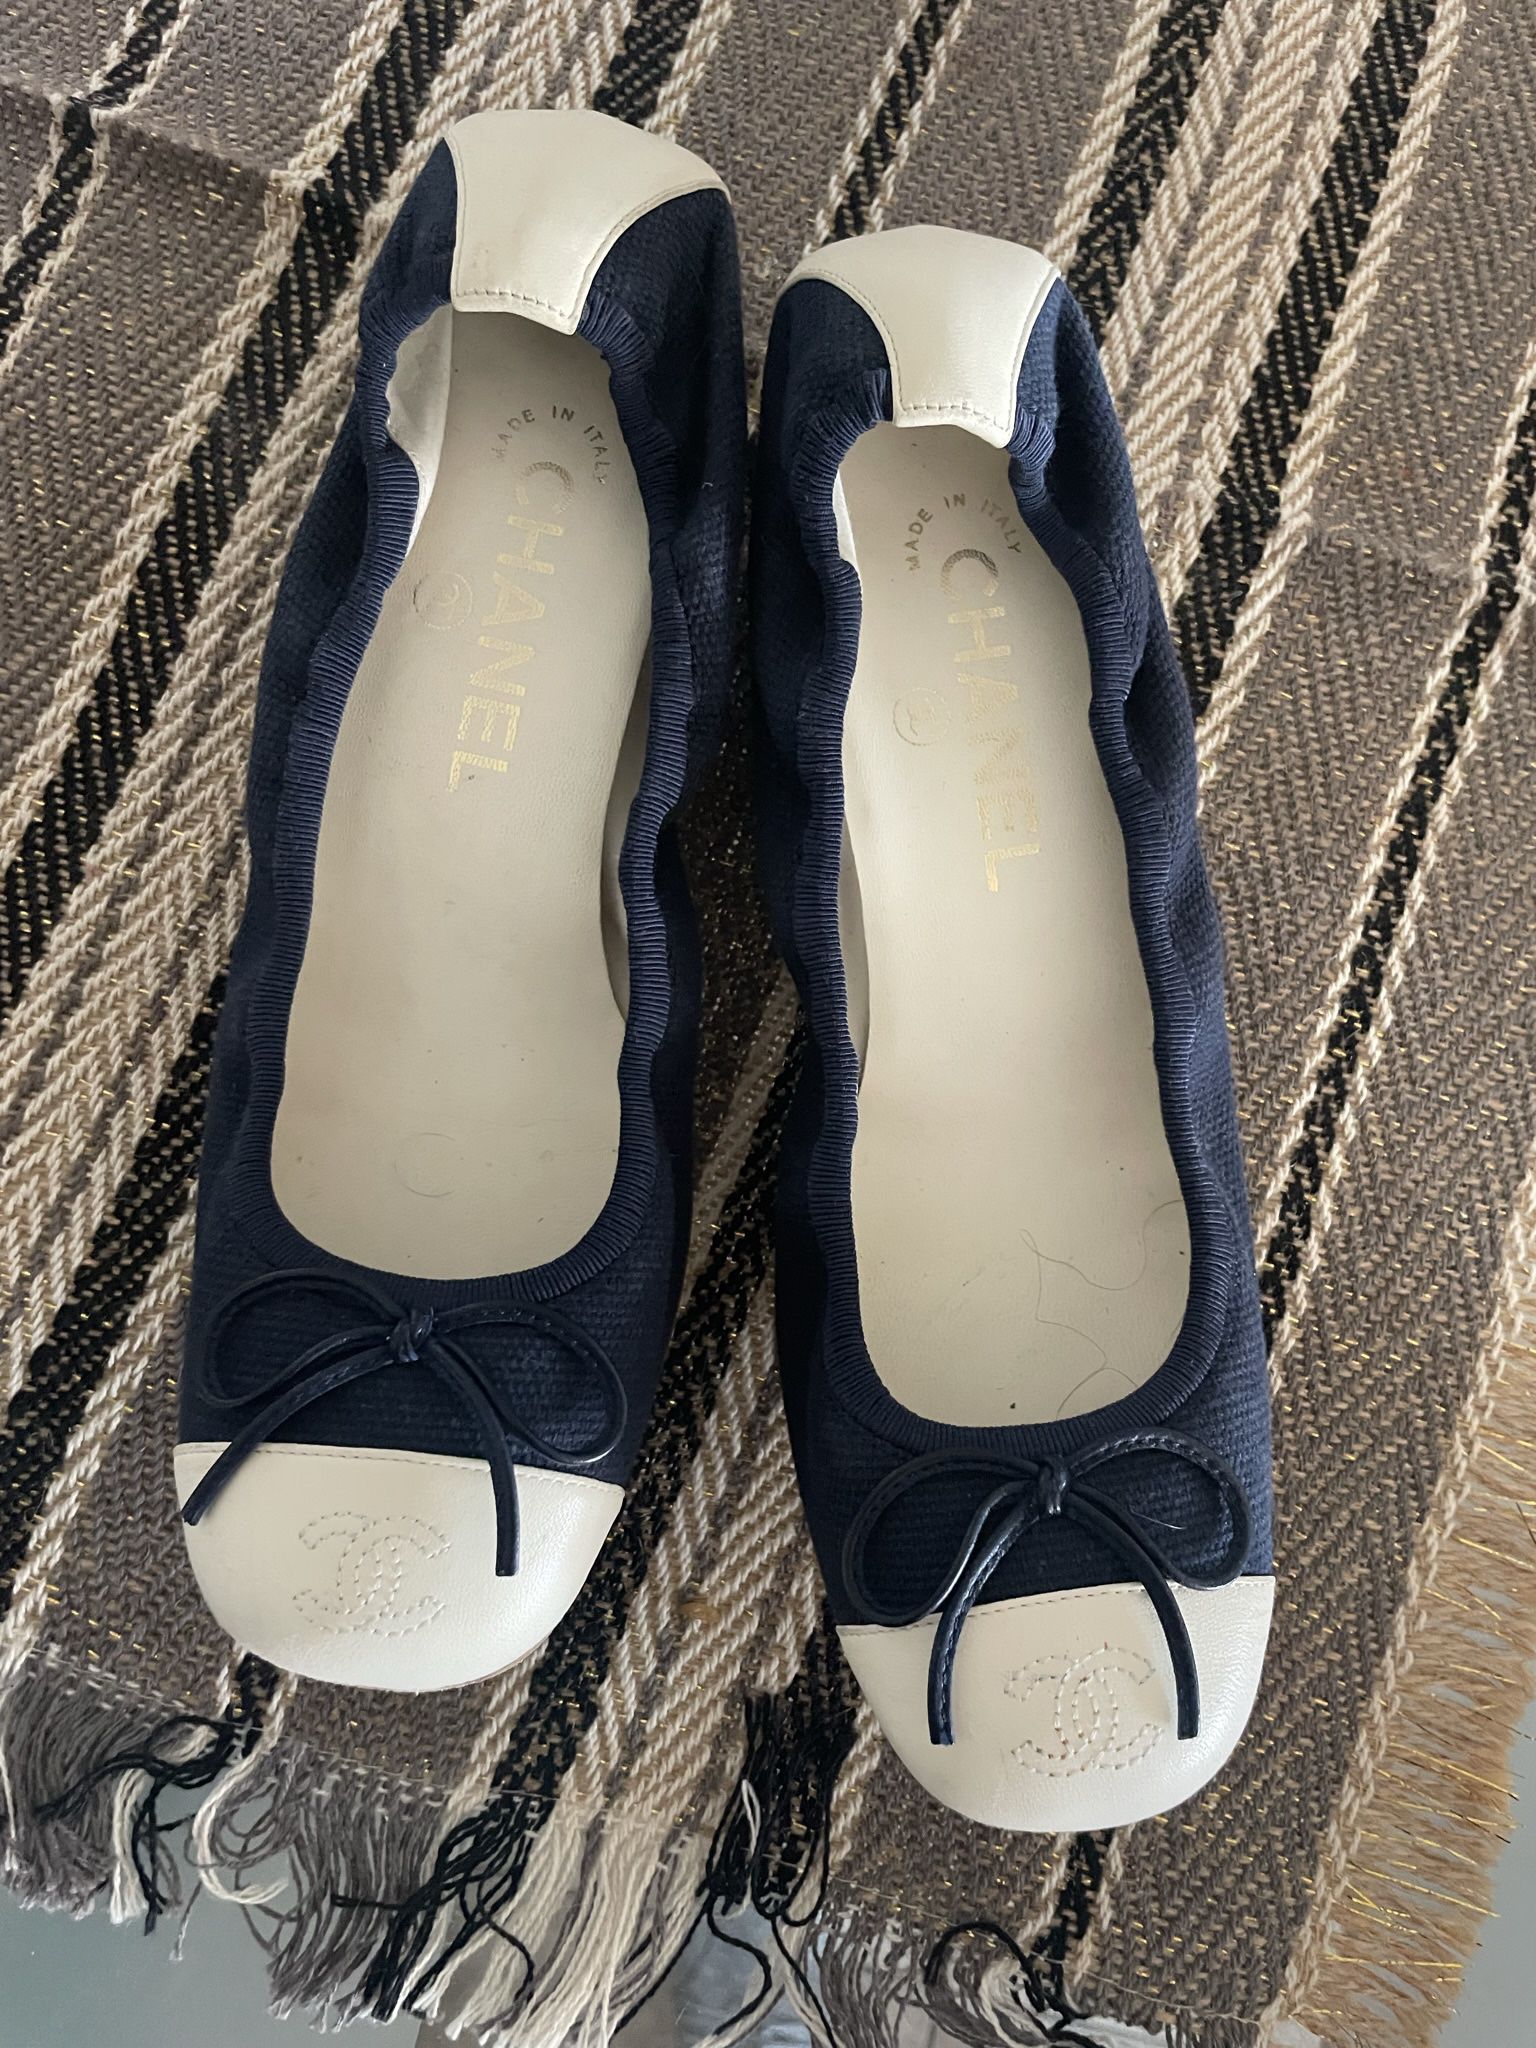 Chanel Ballerina Flats for Sale in Laud By Sea, FL - OfferUp